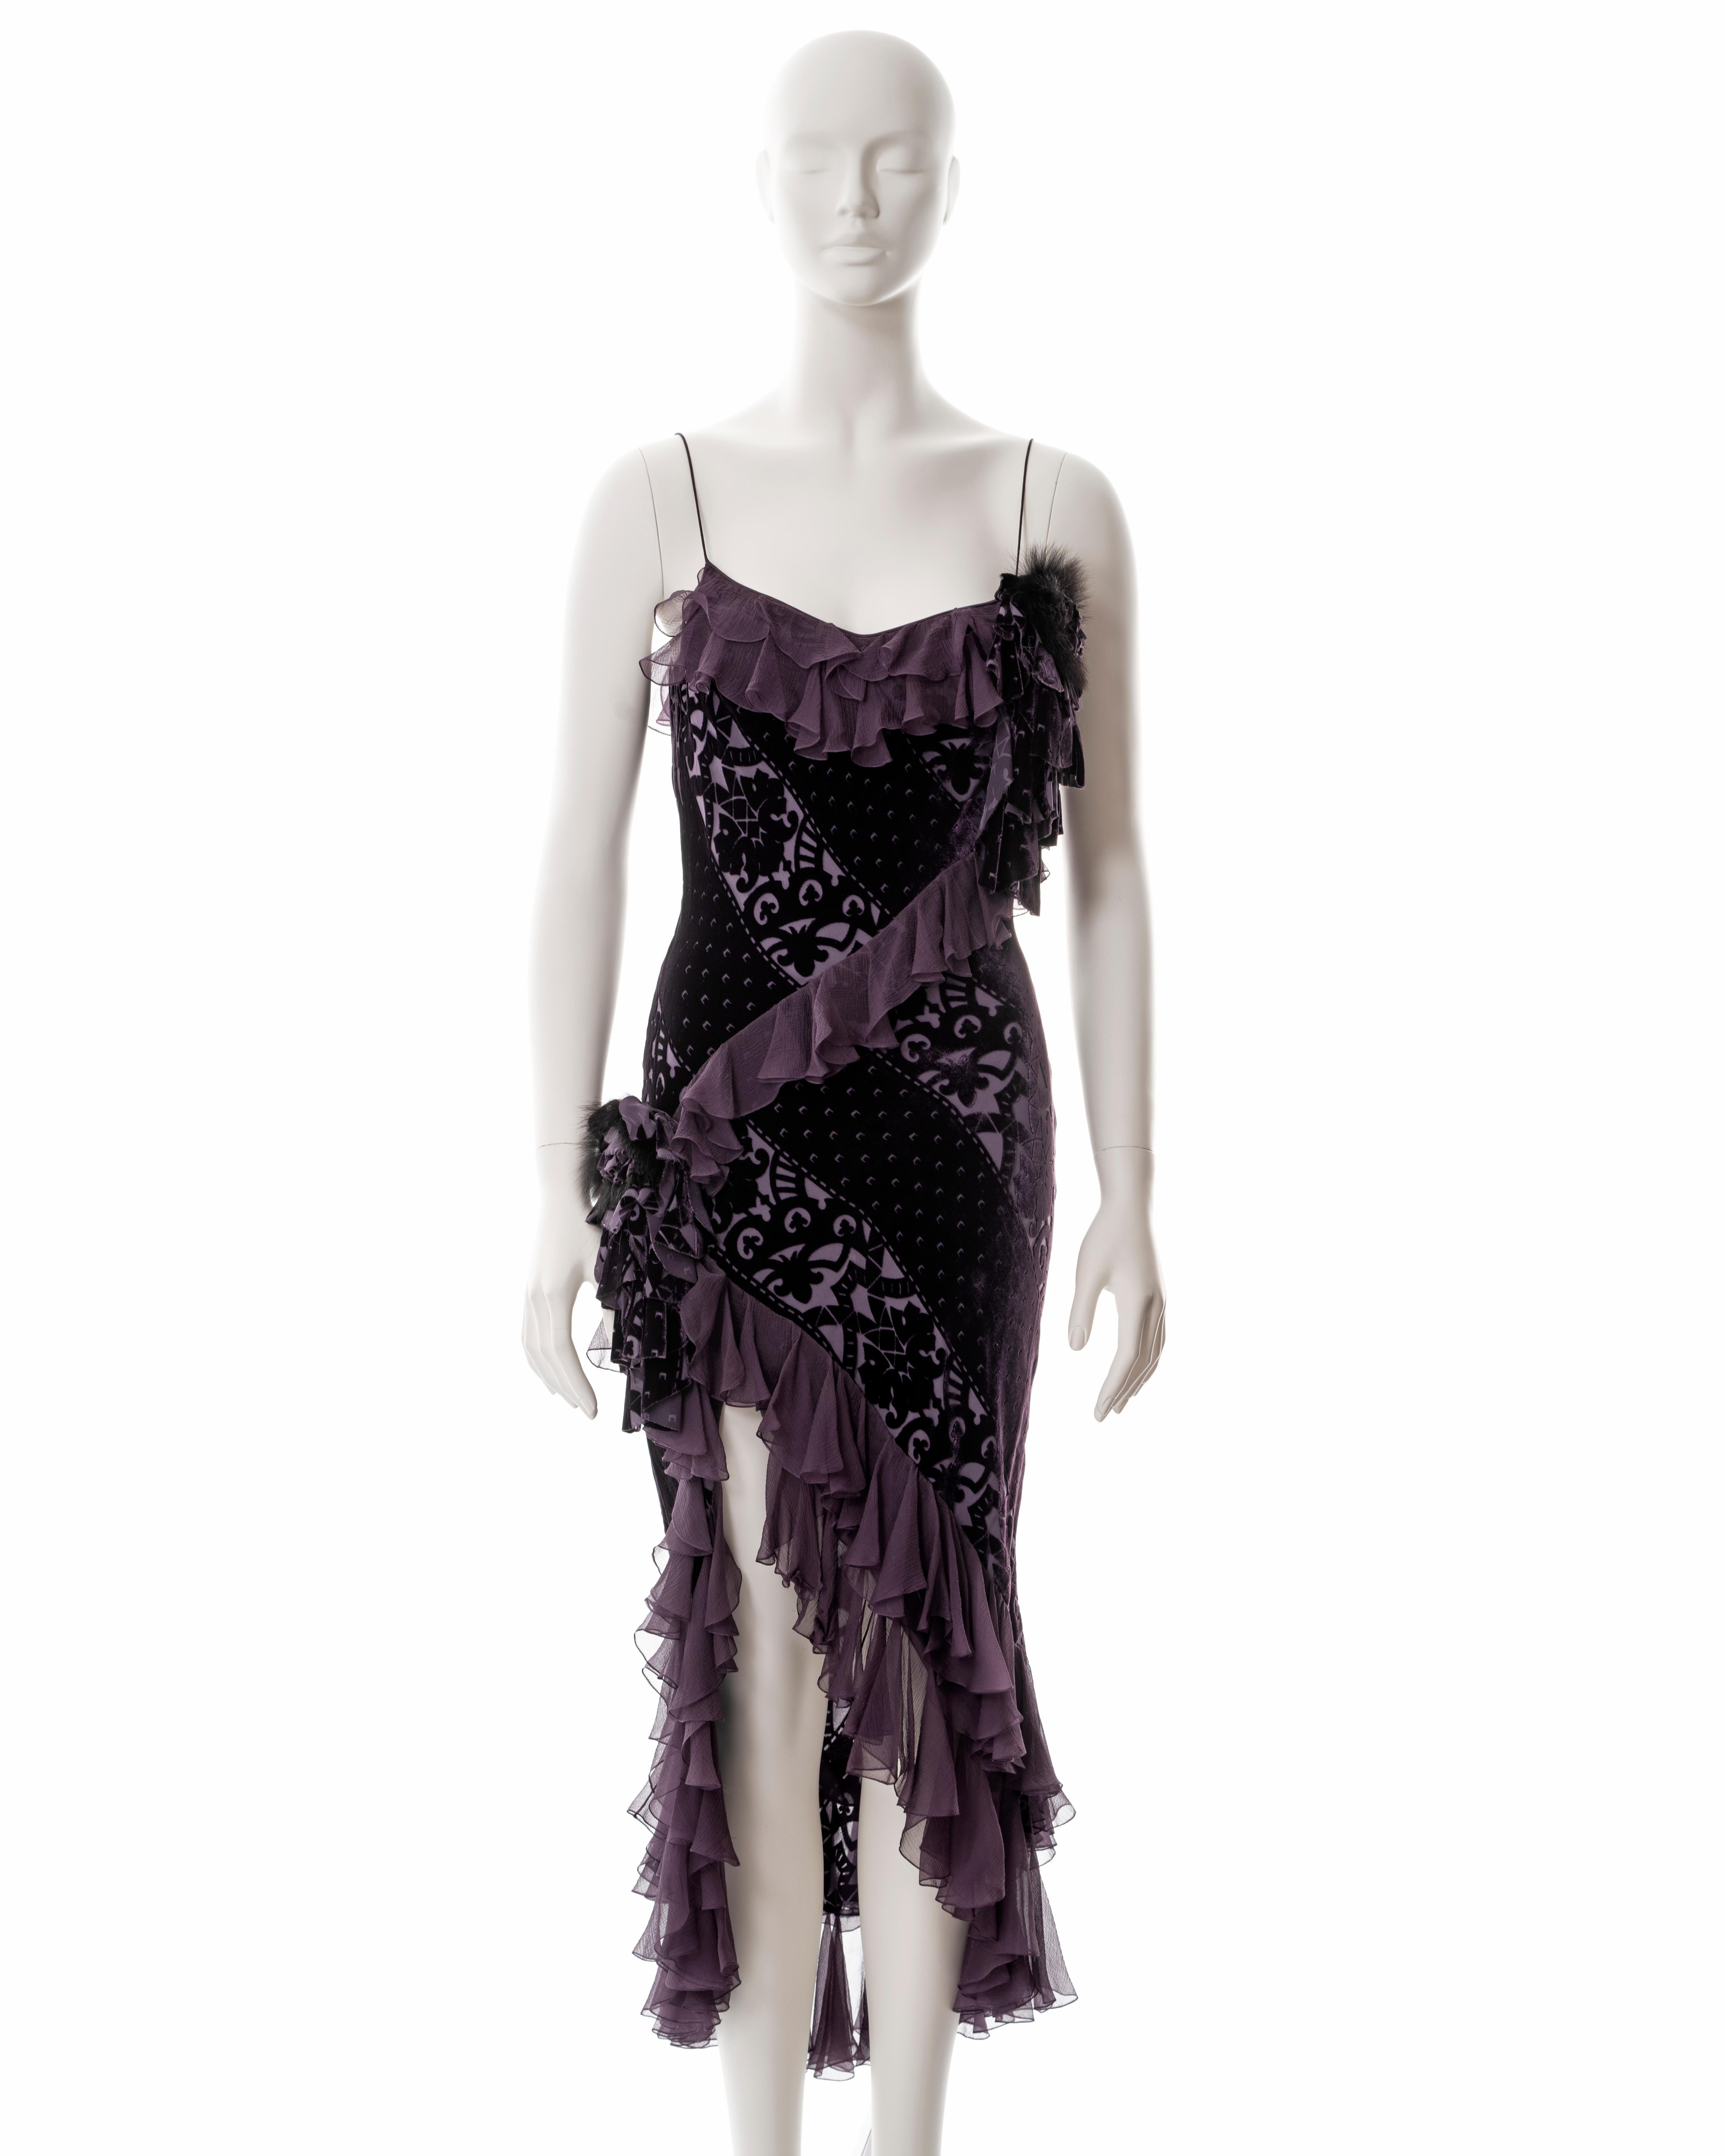 ▪ John Galliano purple velvet devoré and silk bias cut evening dress
▪ Sold by One of a Kind Archive
▪ Fall-Winter 2003 
▪ High leg slit 
▪ Ruffled silk trim and skirt 
▪ Floral corsages with fur 
▪ FR 38 - UK 10 - US 4
▪ Made in France

All